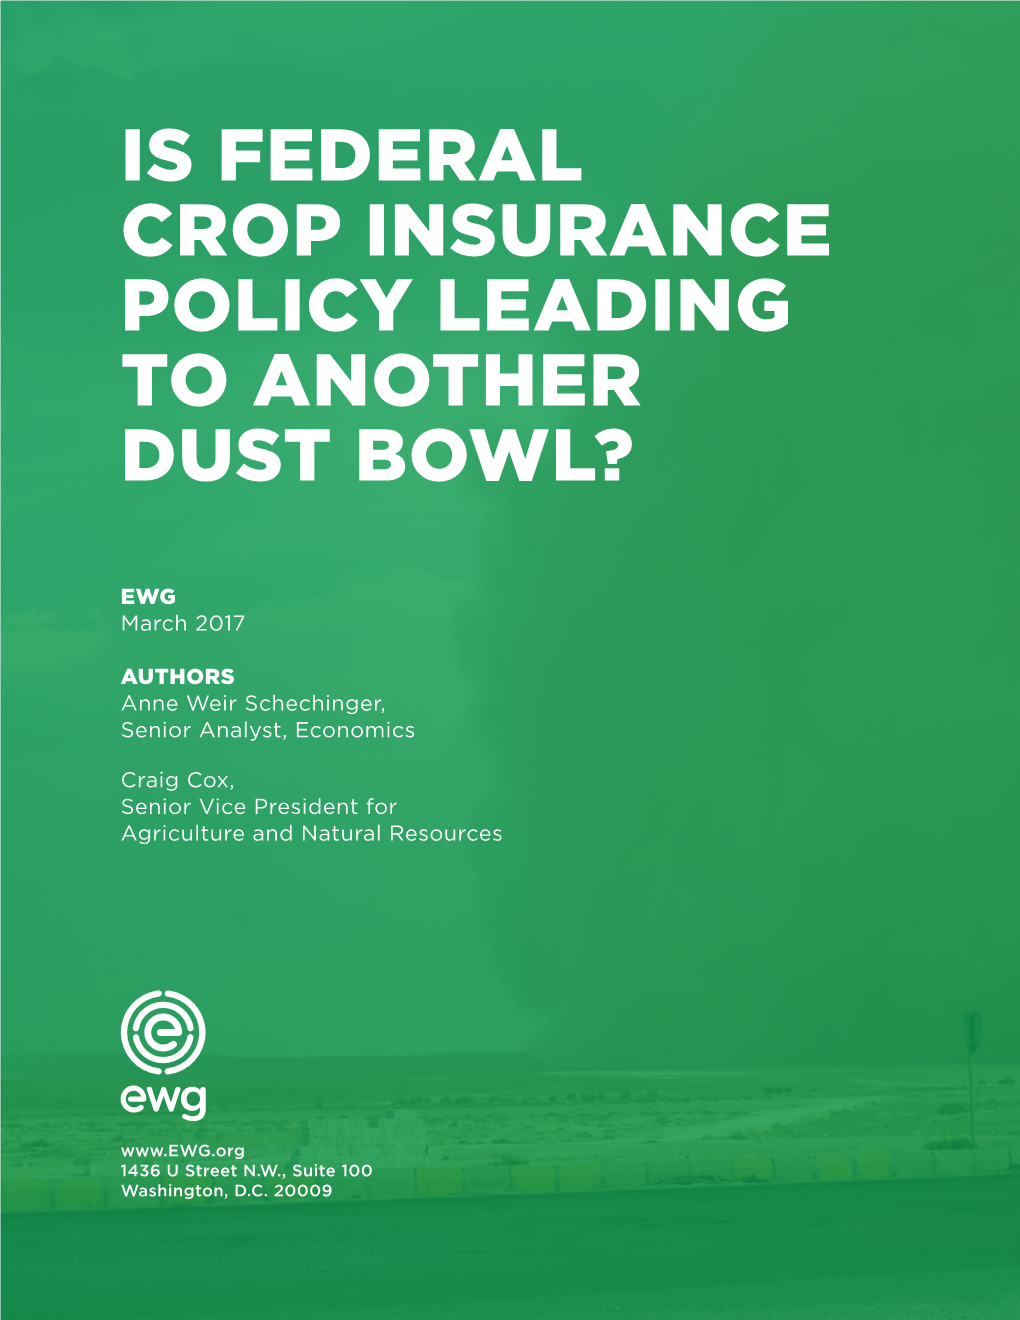 Is Federal Crop Insurance Policy Leading to Another Dust Bowl?